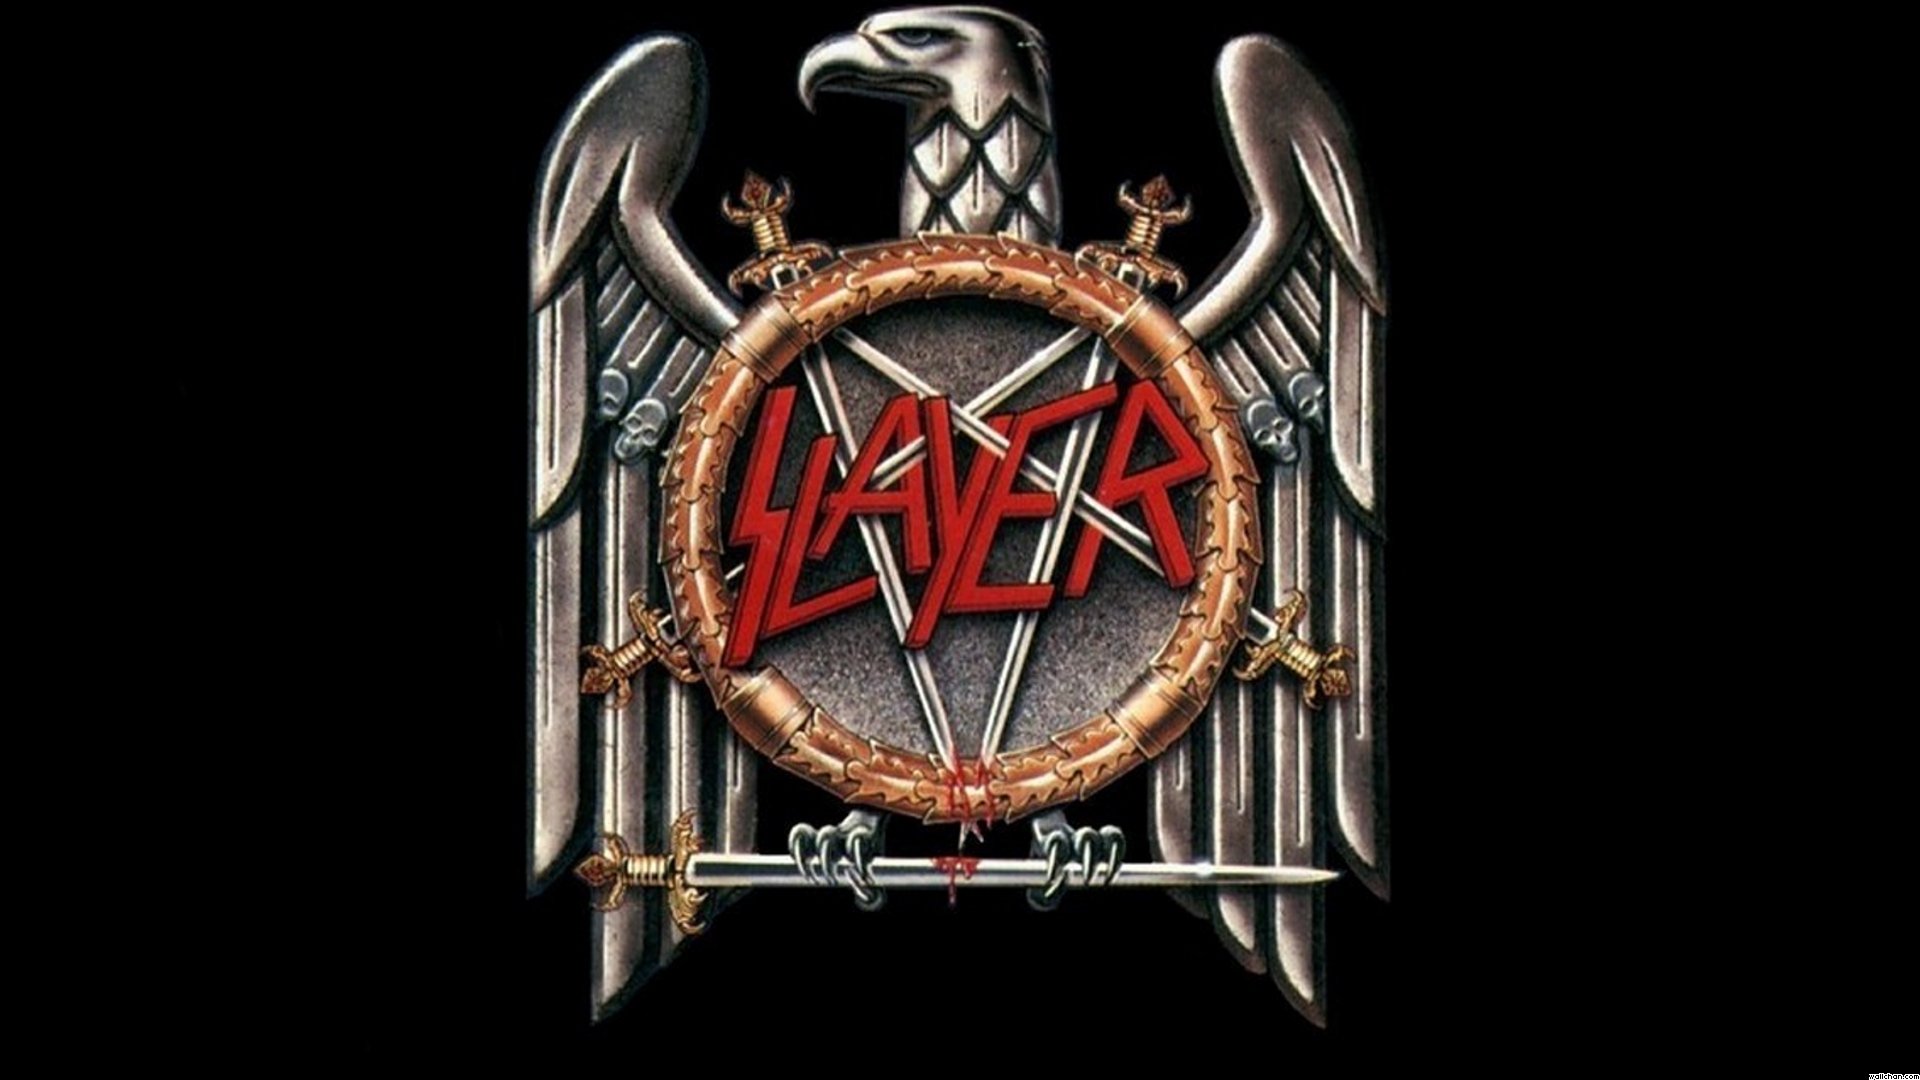 slayer, Groups, Bands, Music, Heavy, Metal, Death, Hard, Rock, Album, Covers Wallpaper HD / Desktop and Mobile Background